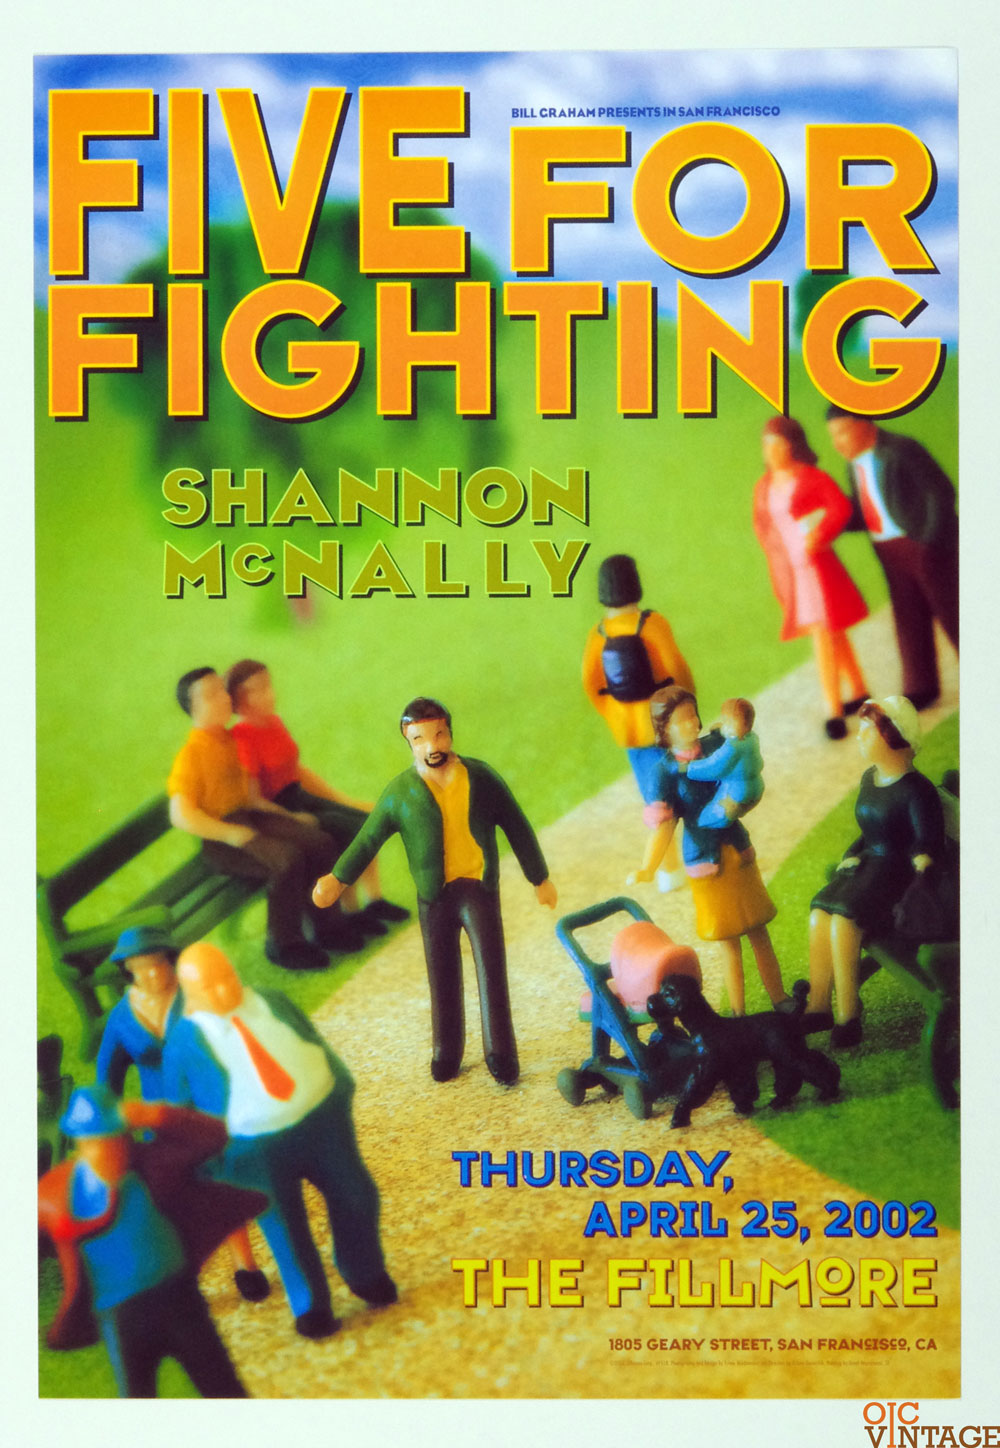 Five for Fighting Shanon McNally Poster 2002 Apr 25 New Fillmore